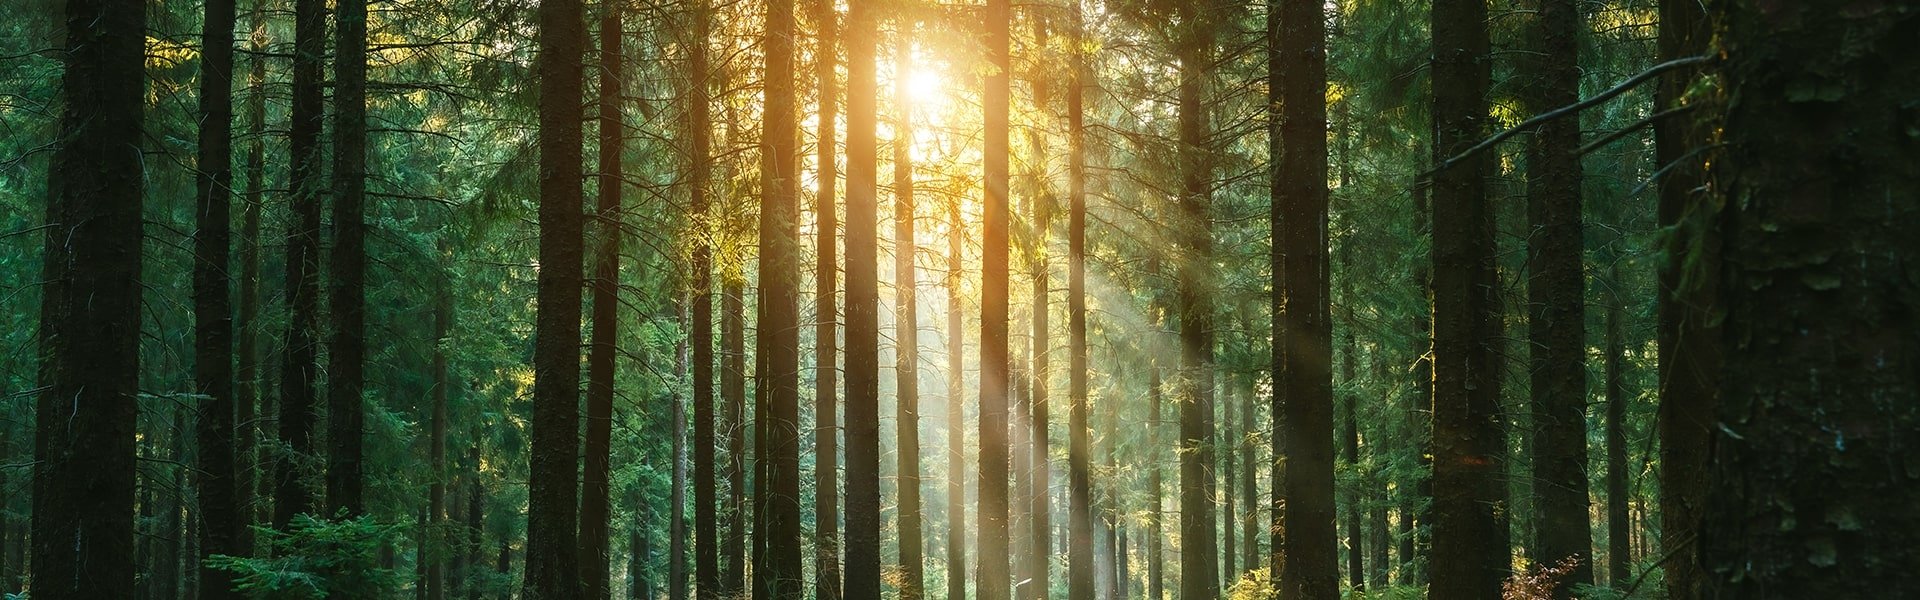 Sun shining in the forest